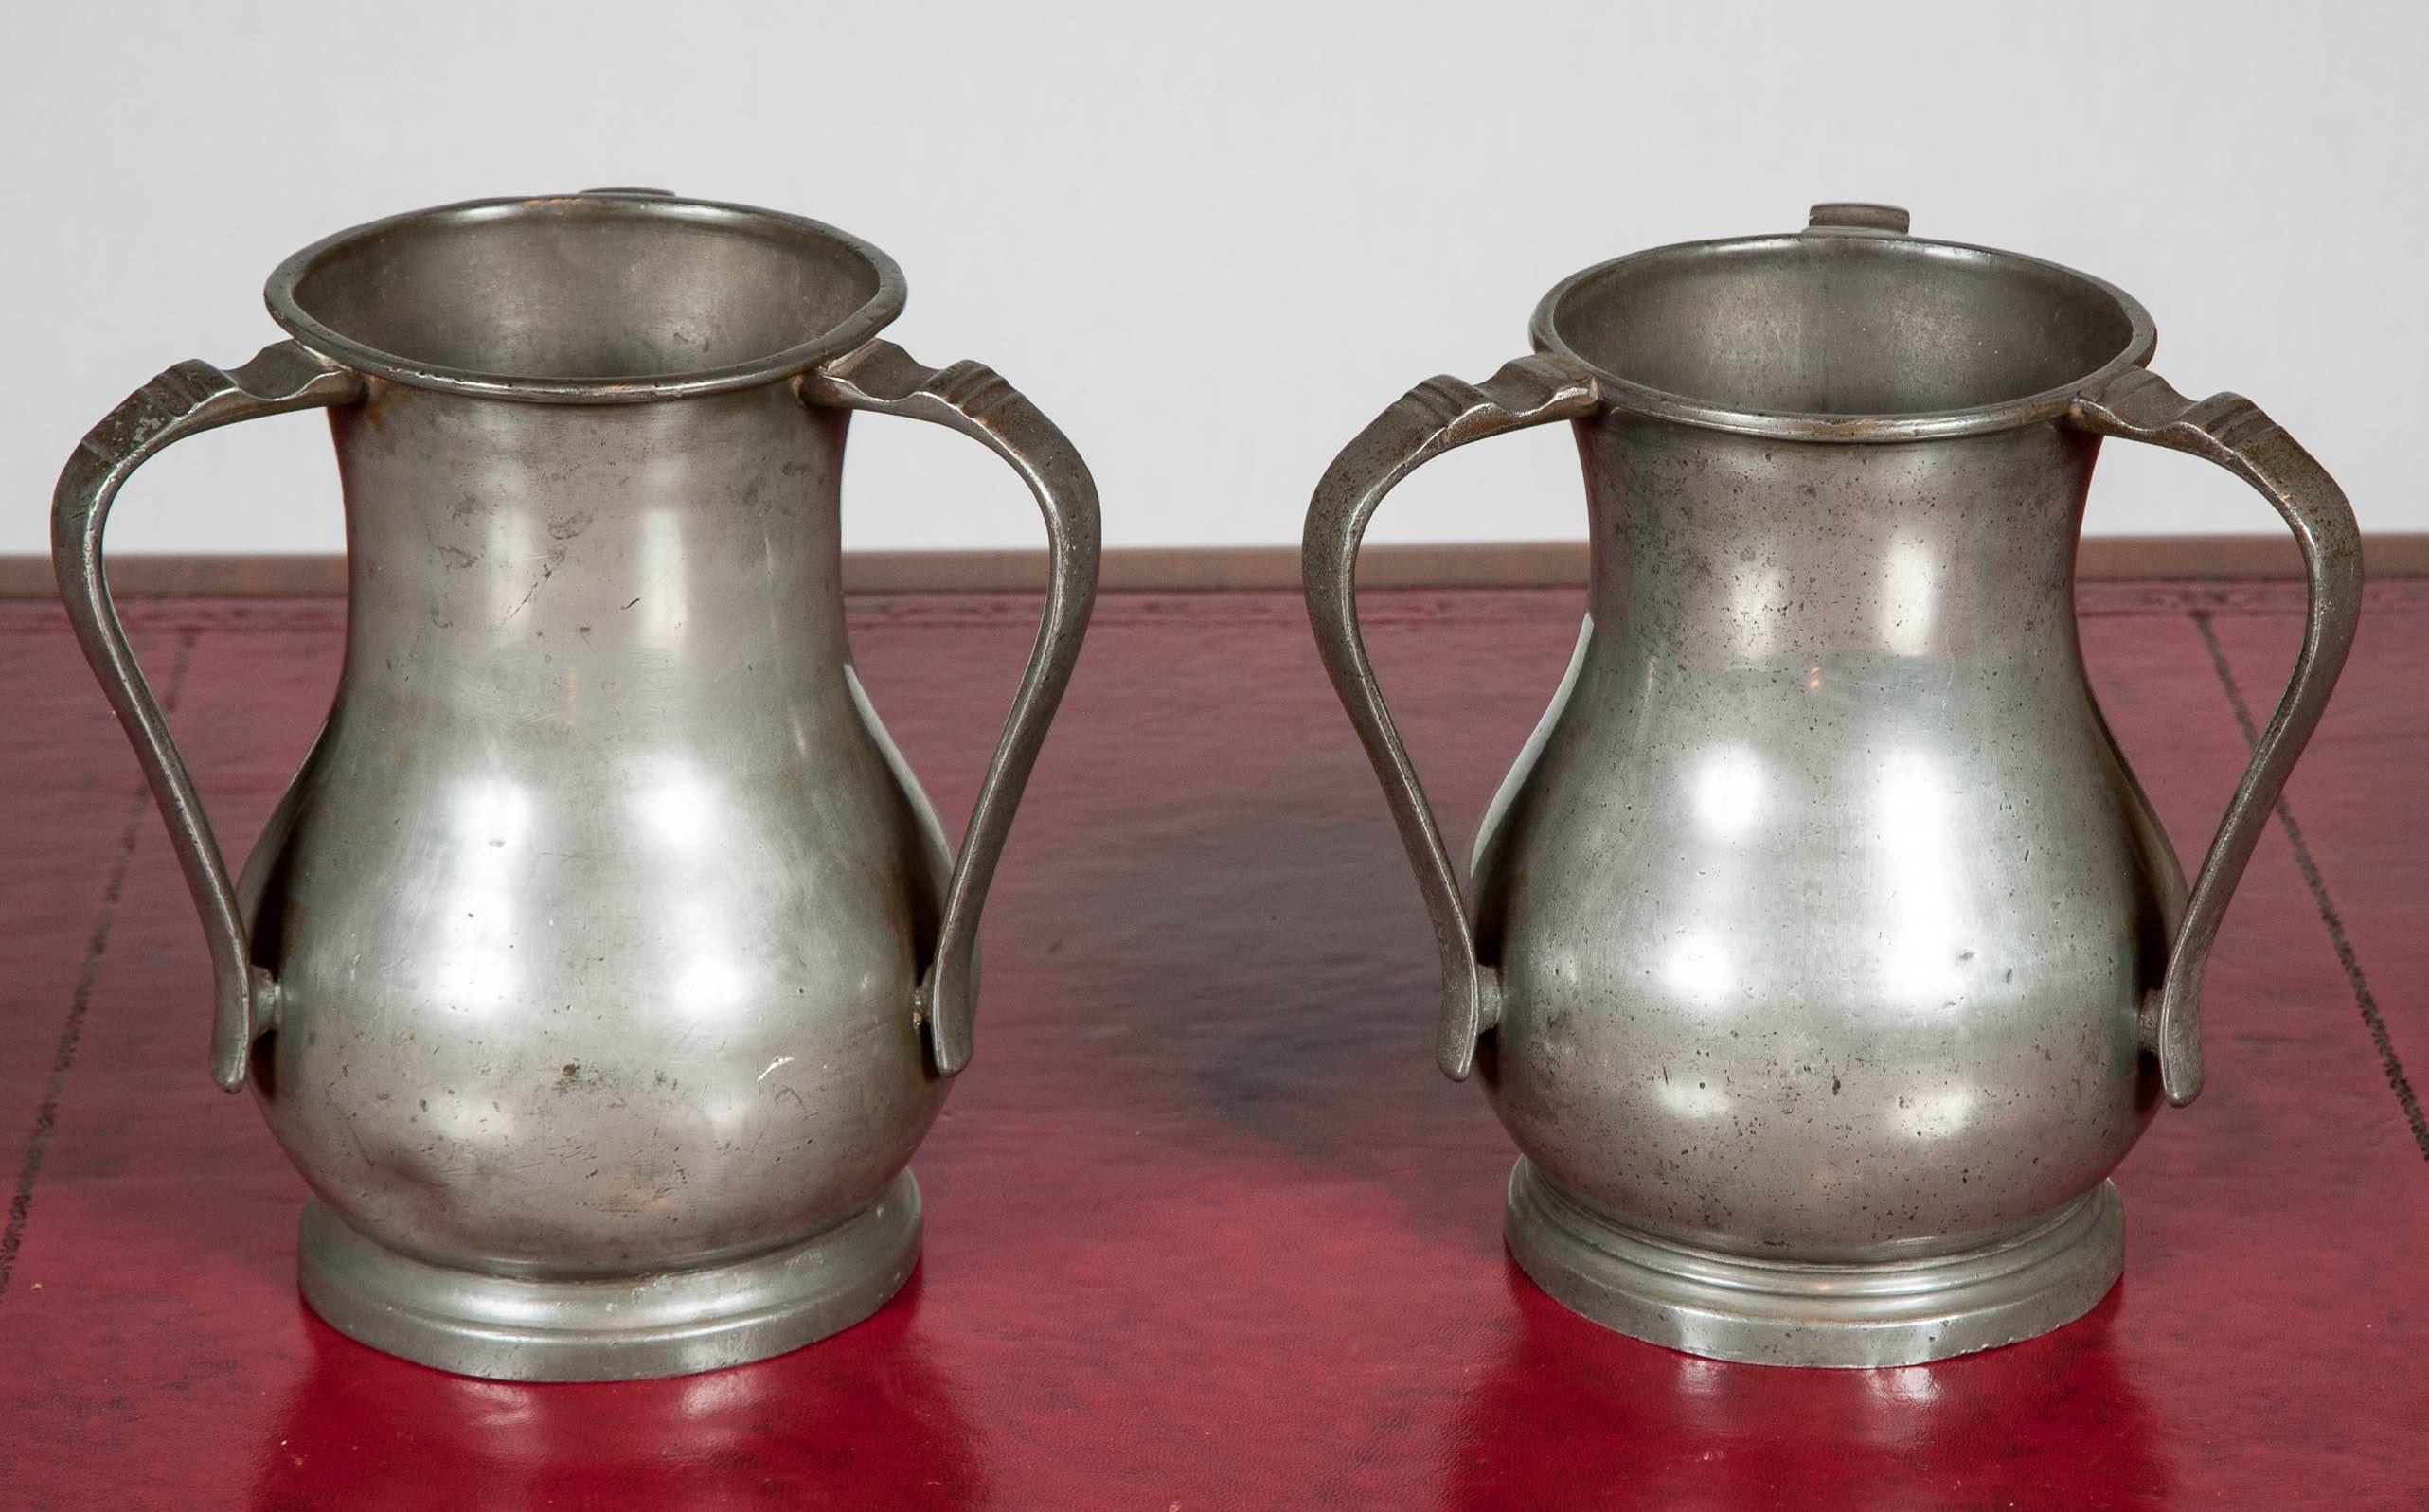 A rare closely matched pair of late 18th century pewter three handled loving cups or passing cups. These appear to have originated in the Bristol area. One is marked with B&P (item 740, page 173 in ‘Cotterell’), Robert Bush and Richard Perkins,